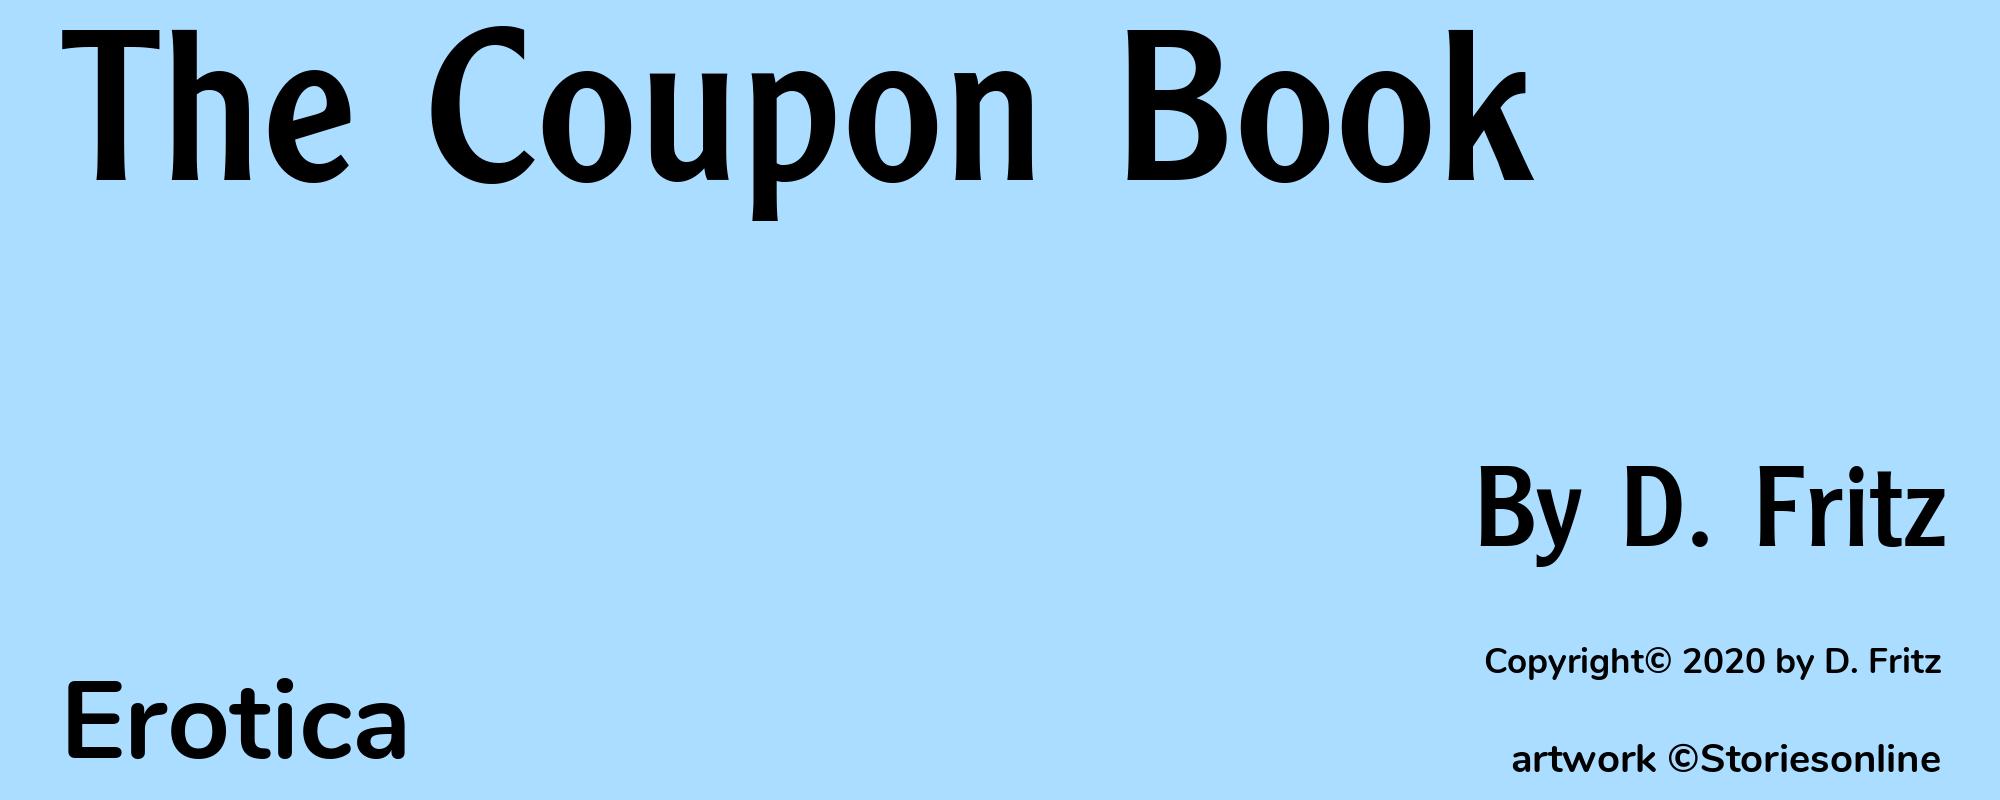 The Coupon Book - Cover